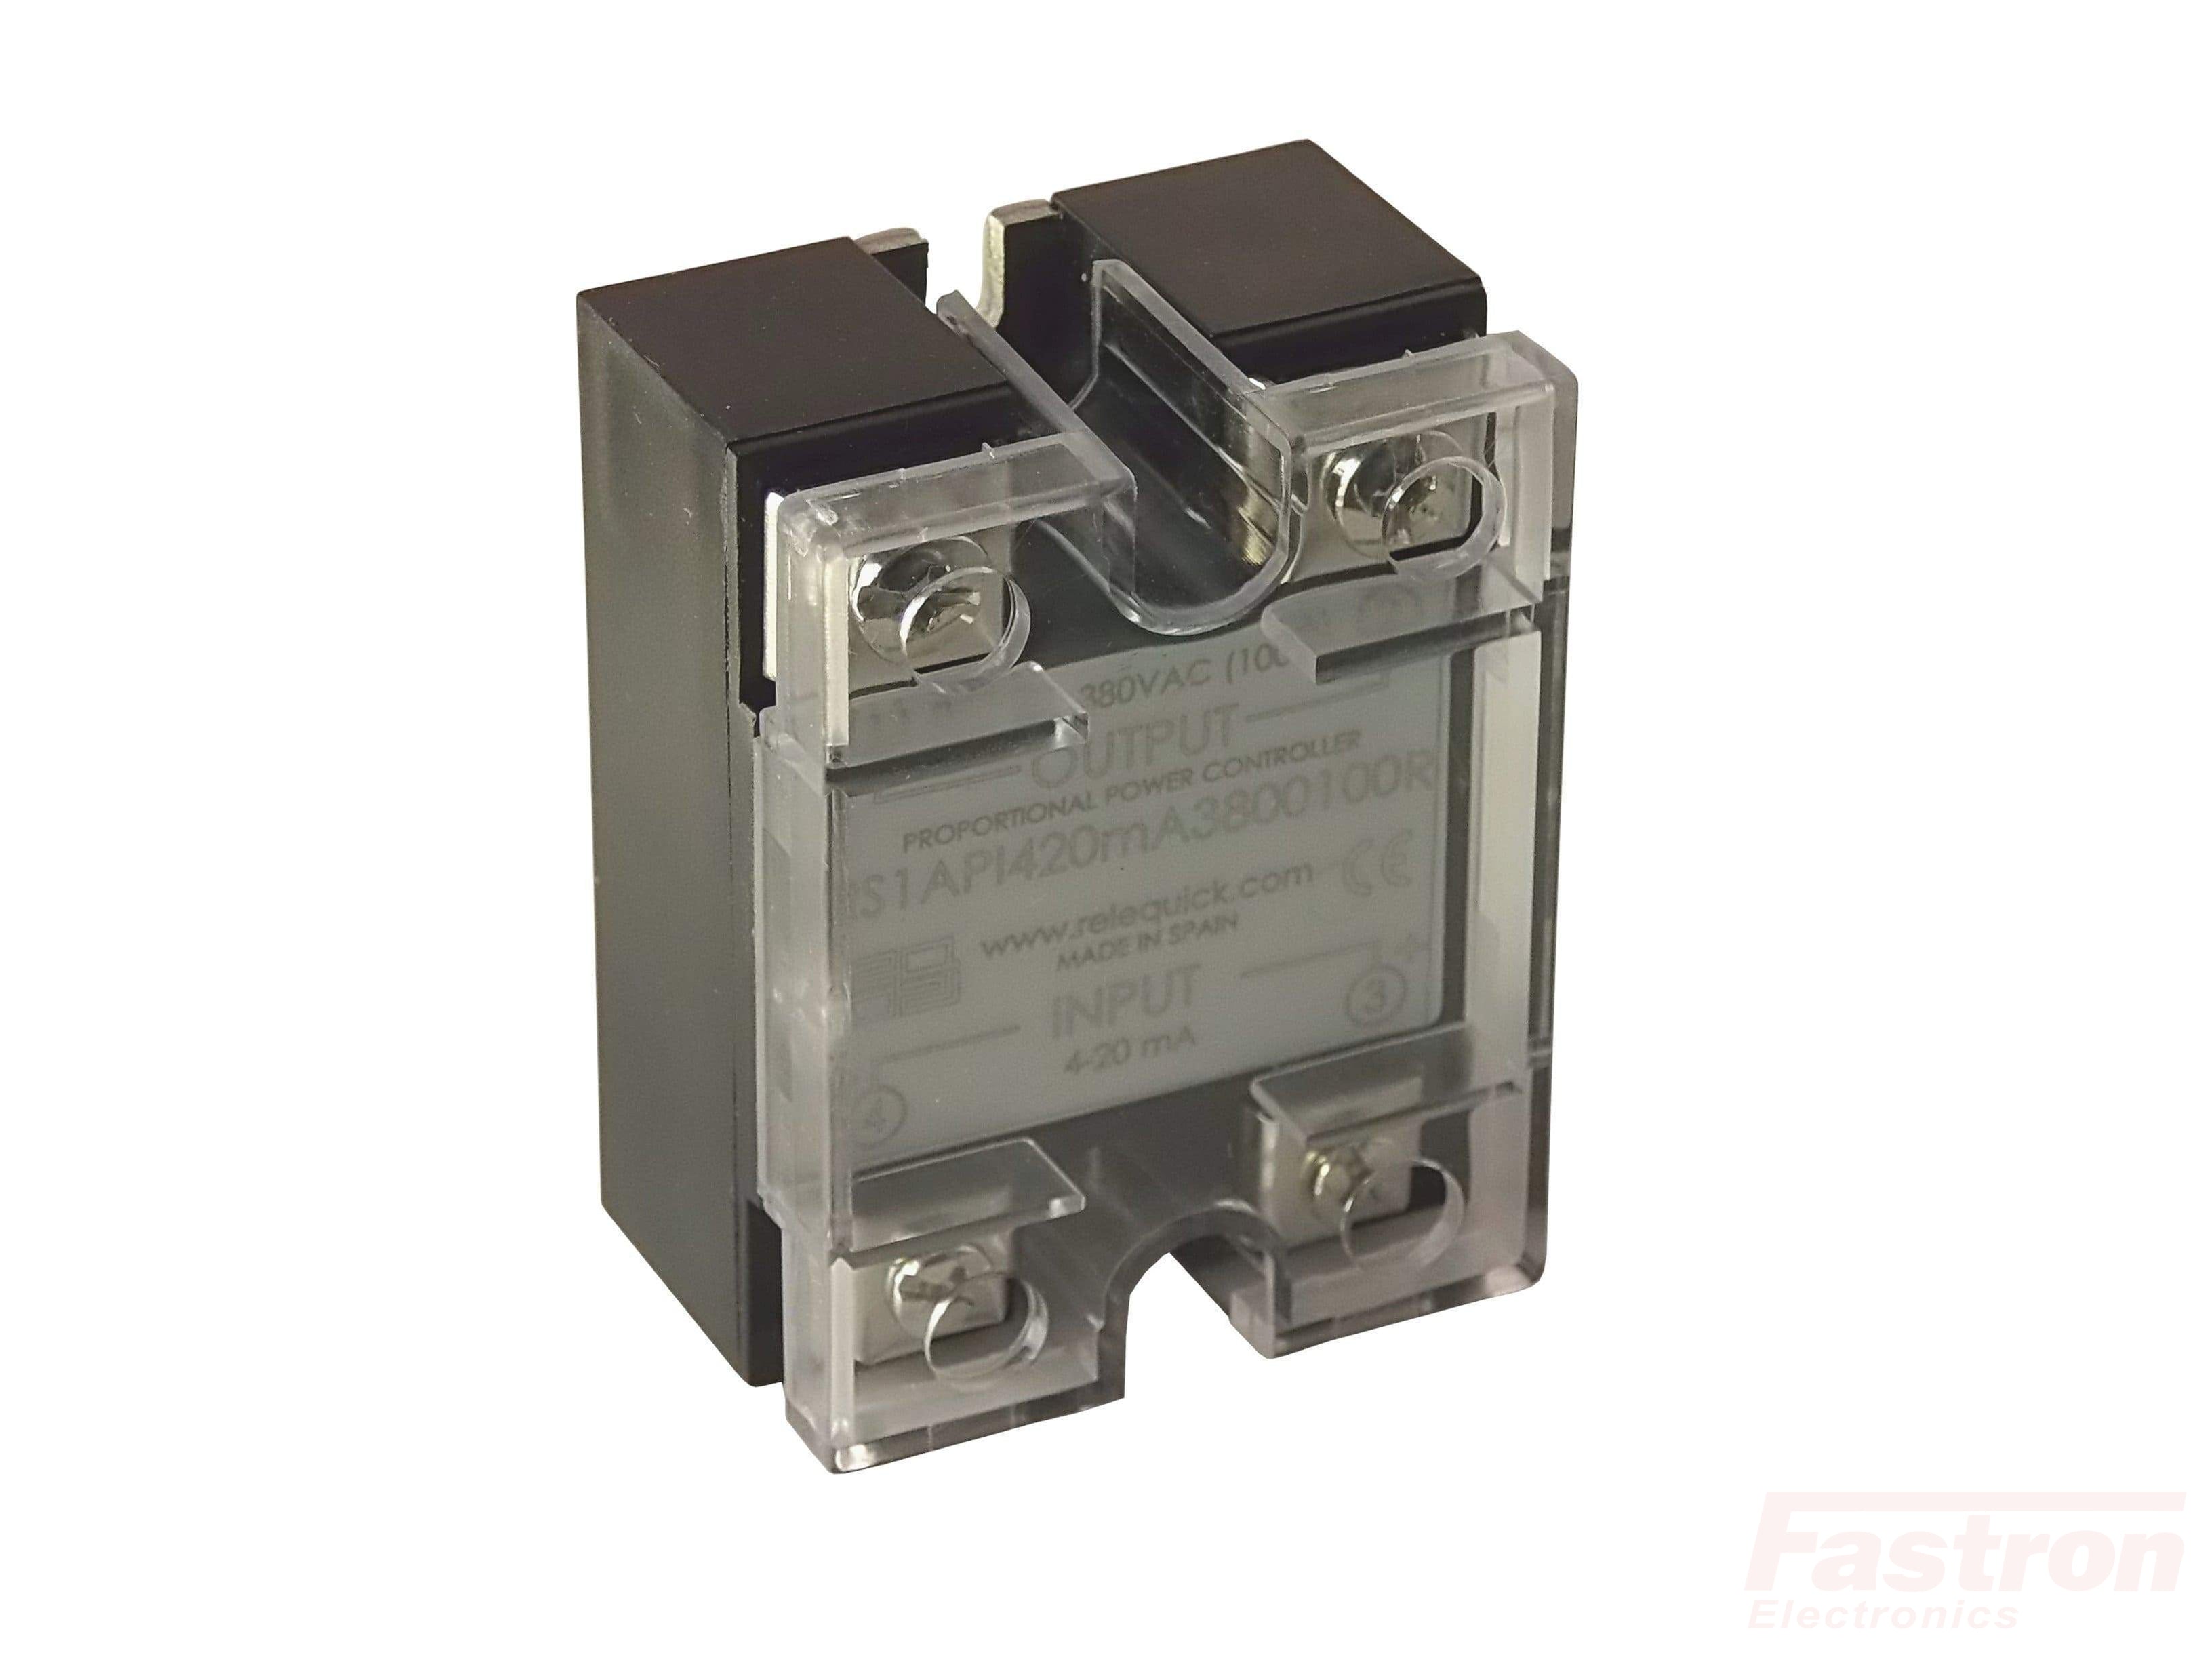 RS1API420MA280080R, Solid State Relay Based Integrated Proportional Controller, 4-20mA Input, 240VAC 80Amp Load